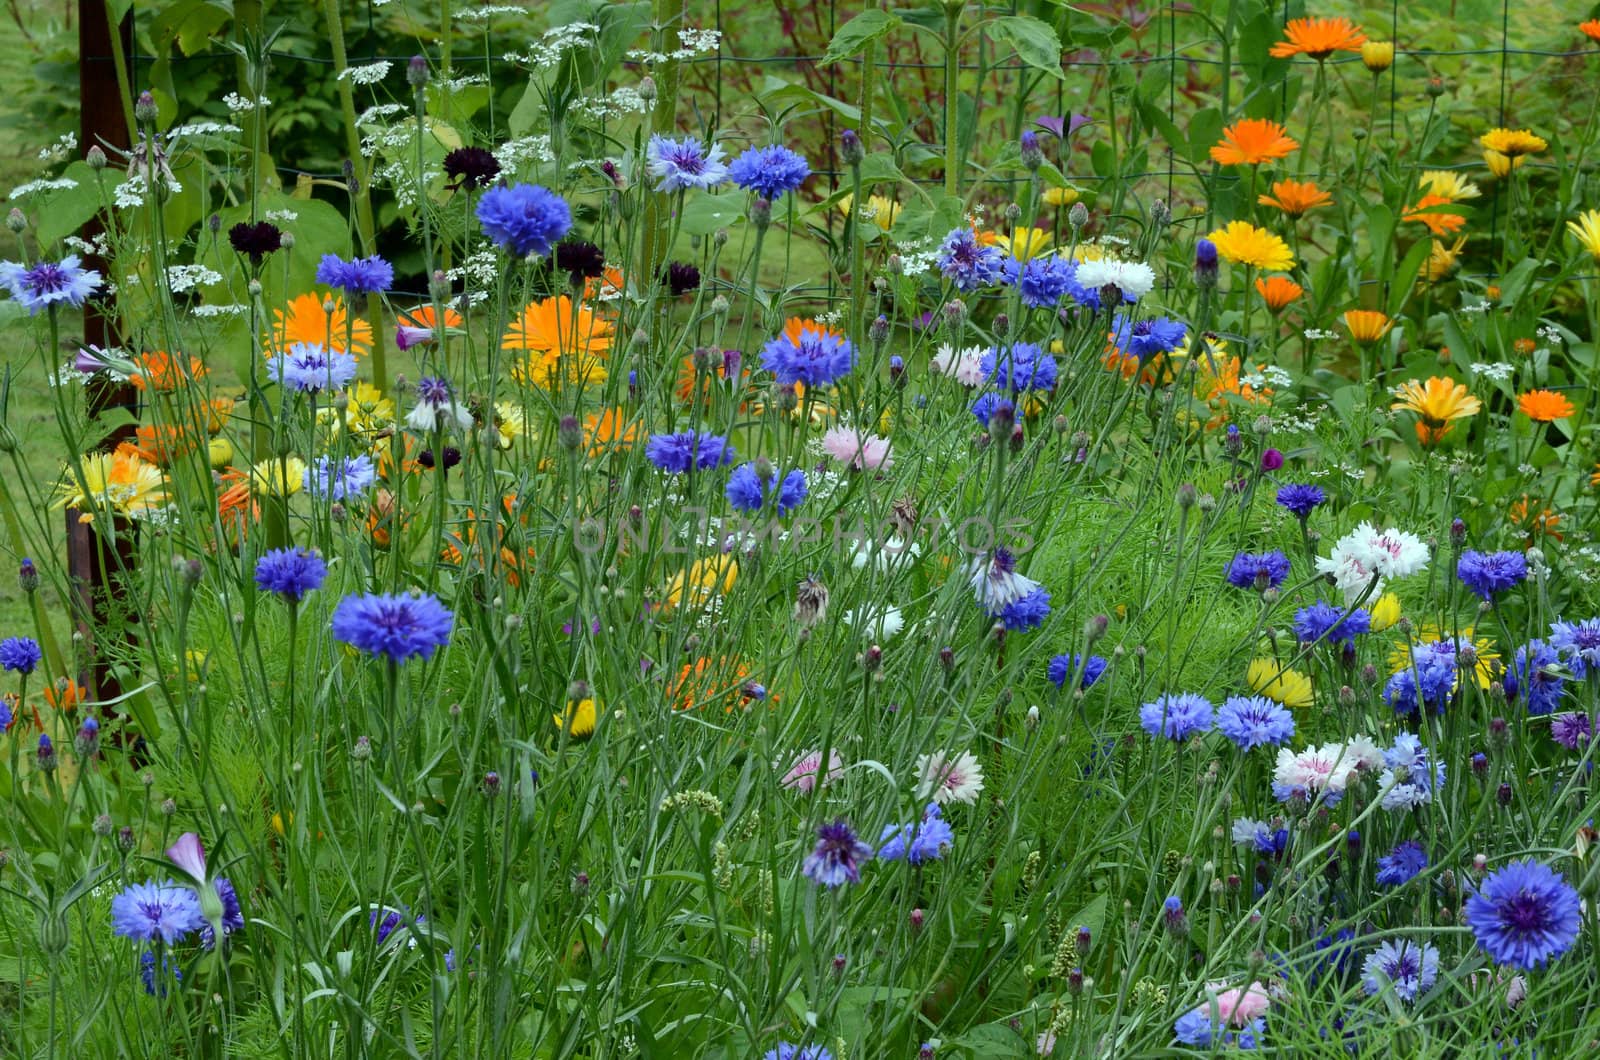 Cornflower and ring flowers in a summer meadow